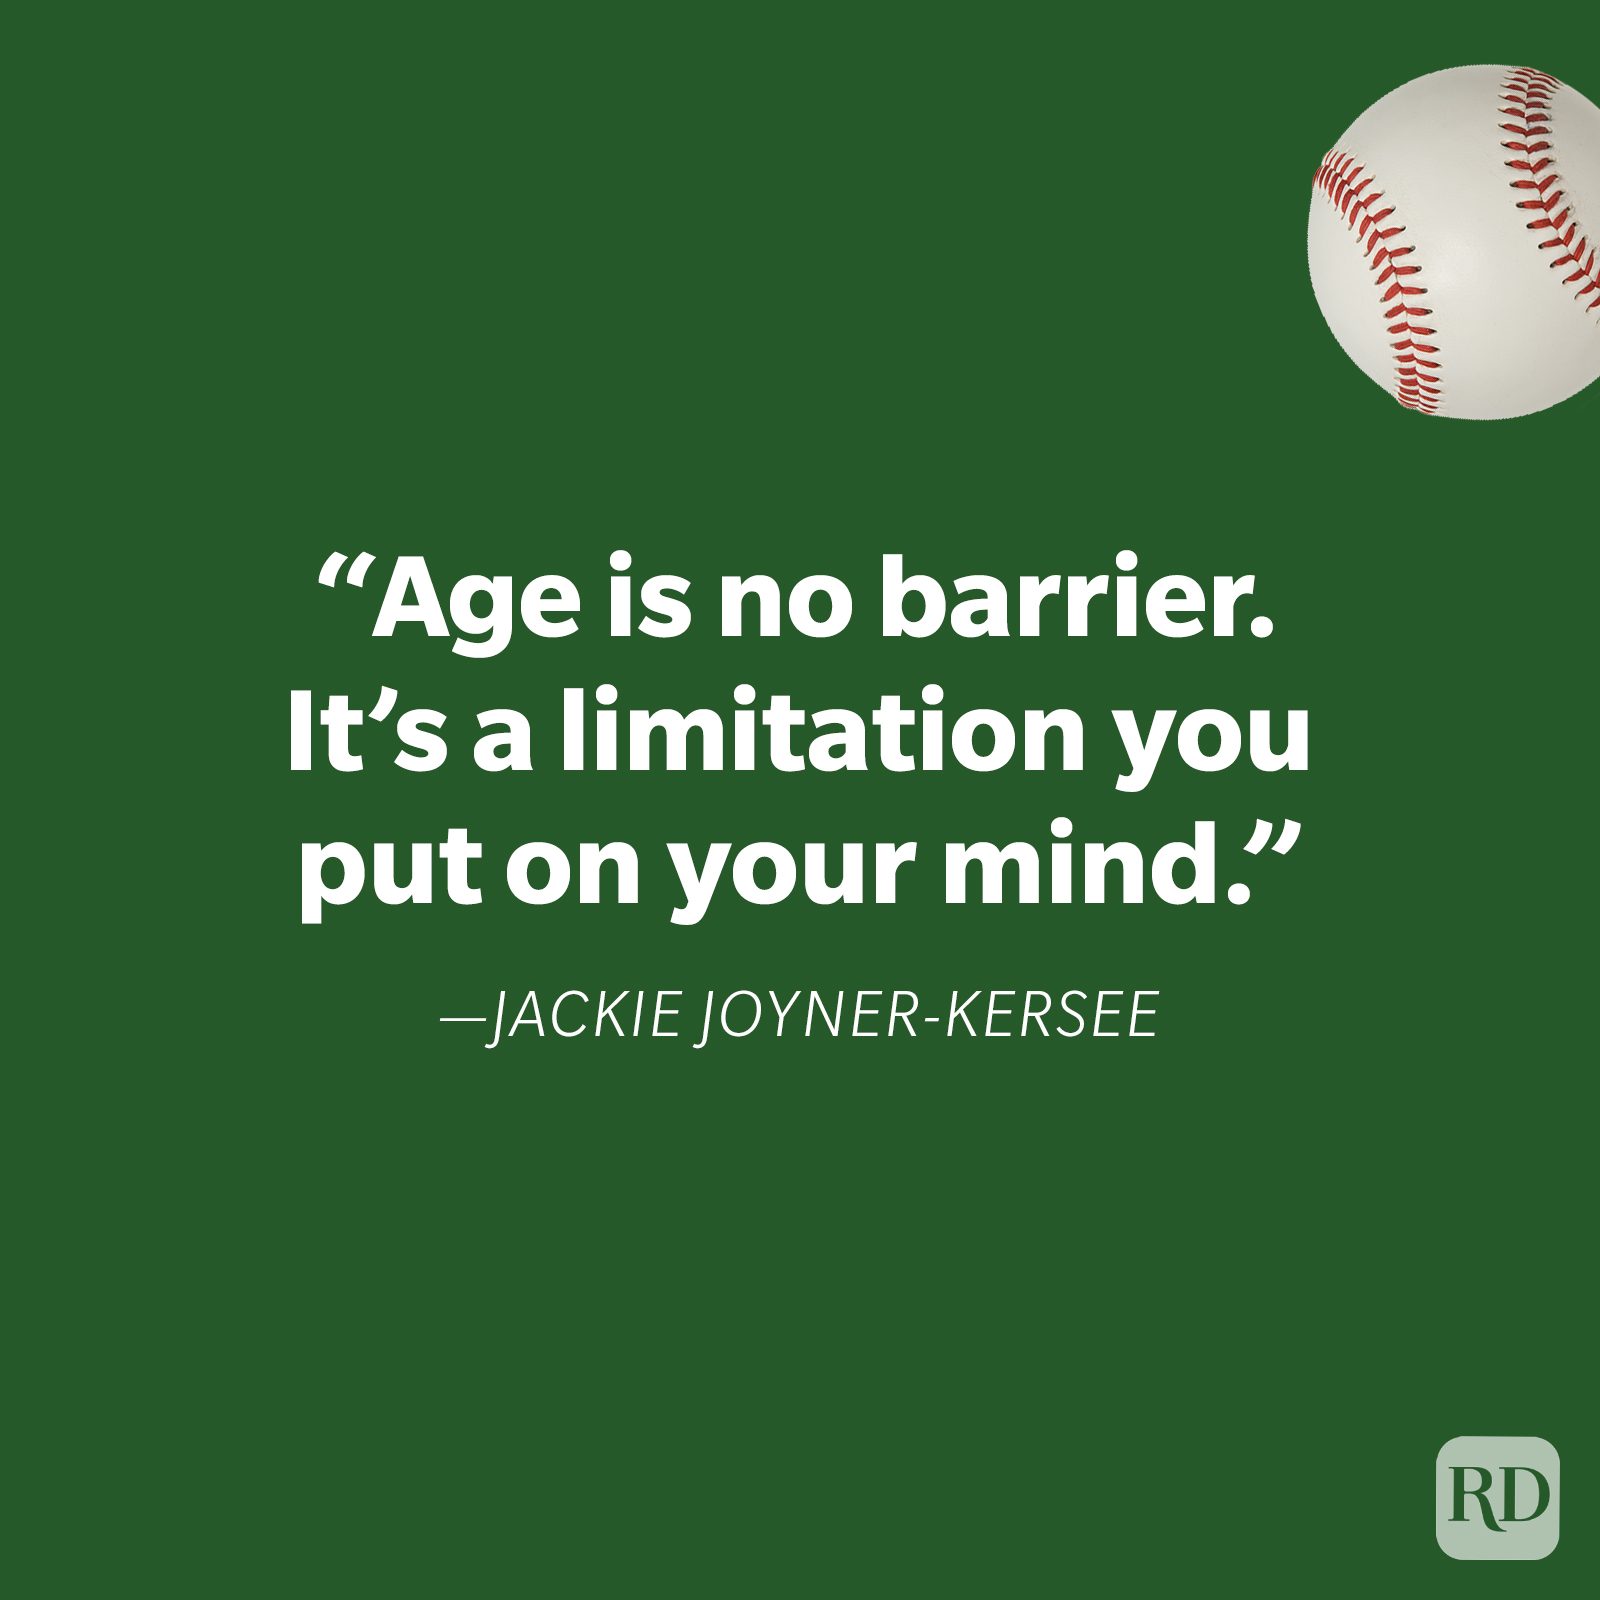 75 Inspiring Baseball Quotes to Get You Motivated in 2023